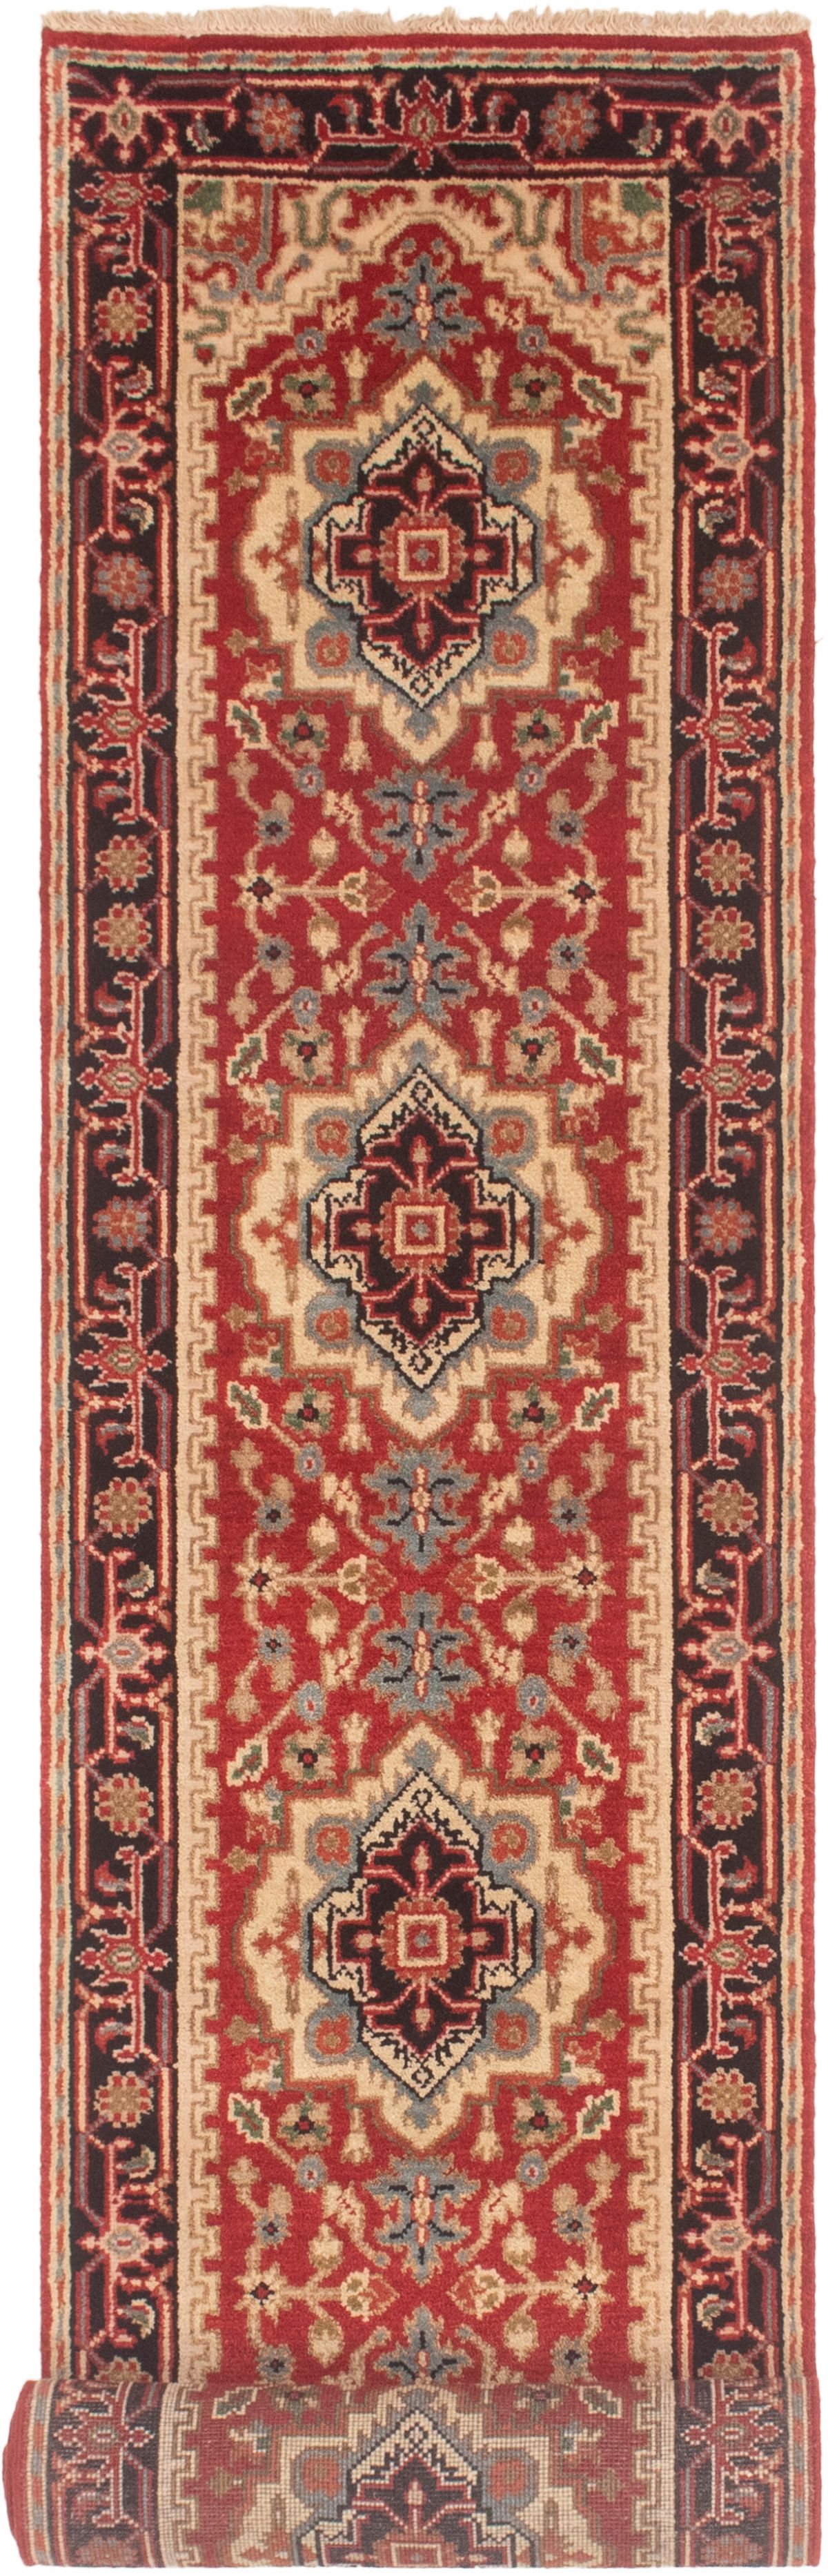 Hand-knotted Serapi Heritage Red Wool Rug 2'7" x 15'10"  Size: 2'7" x 15'10"  